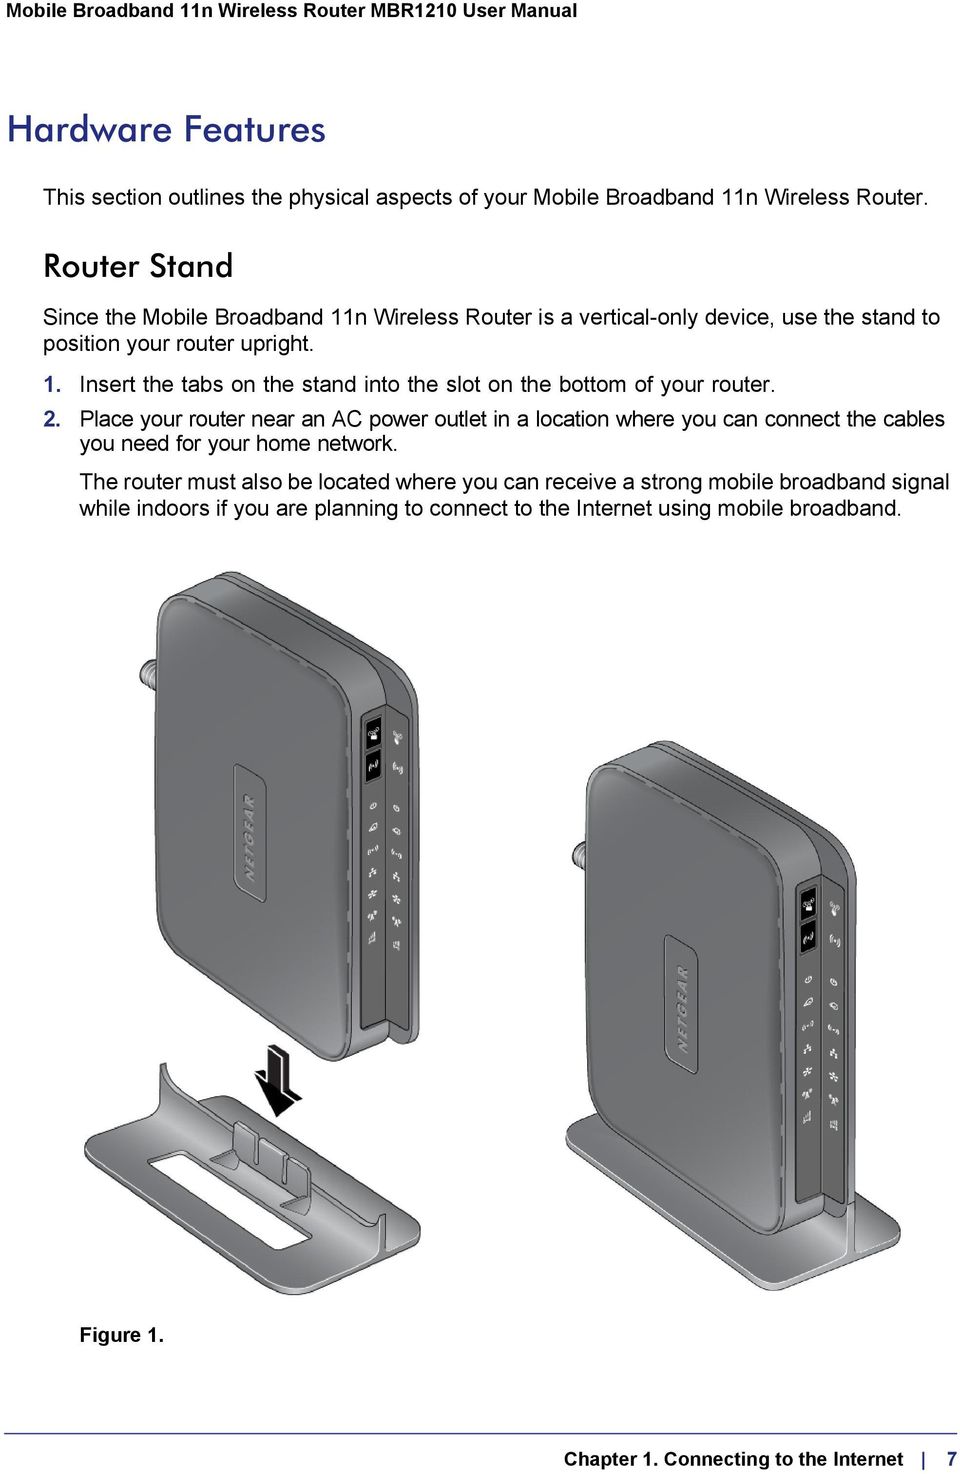 2. Place your router near an AC power outlet in a location where you can connect the cables you need for your home network.